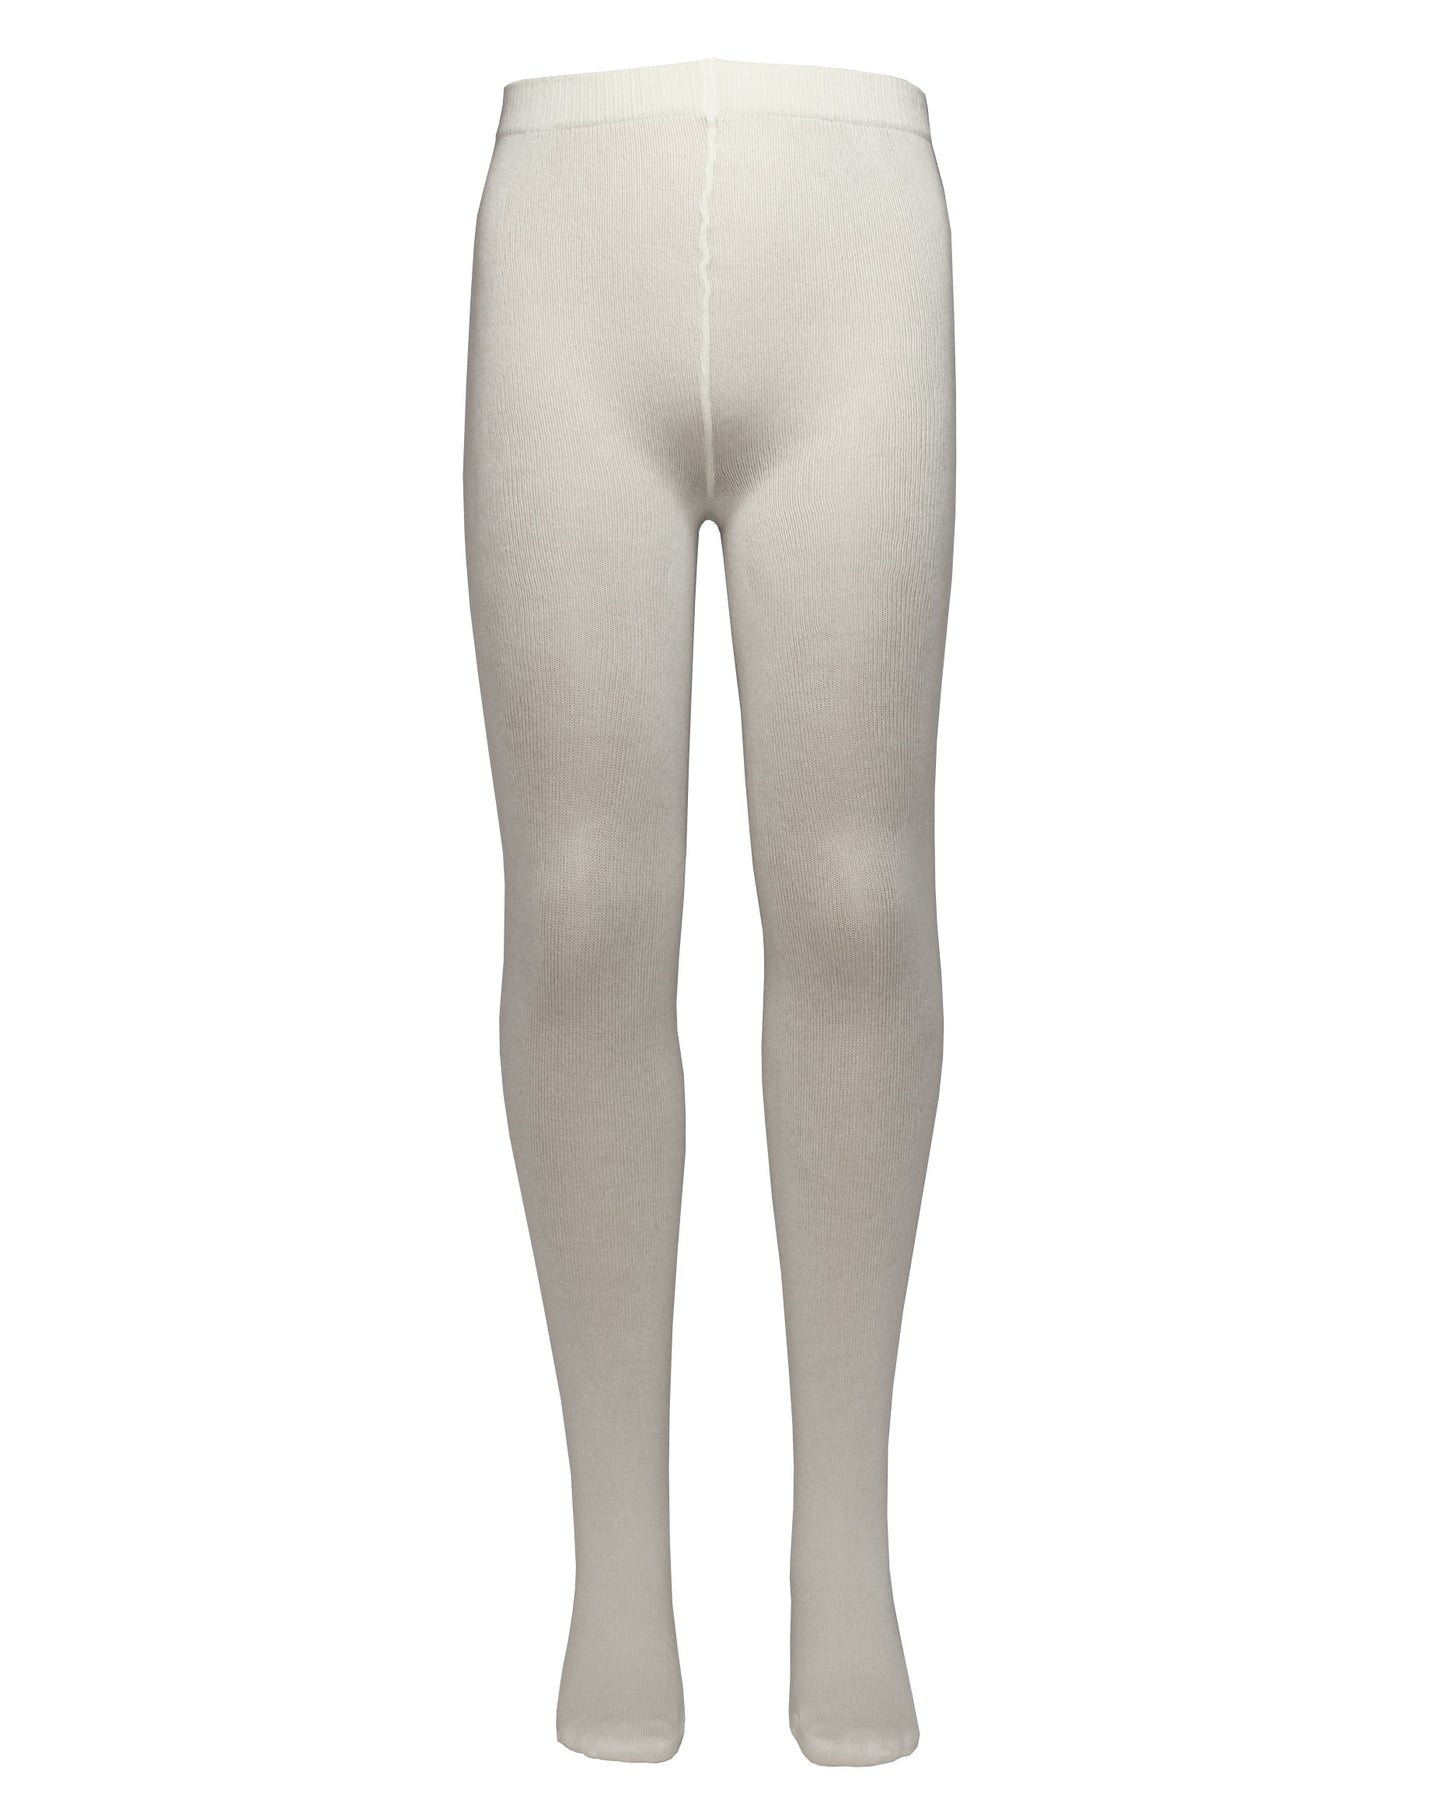 Omsa MiniCotton Collant - White soft cotton mix knitted tights with a deep comfort waistband and flat seamless toe.